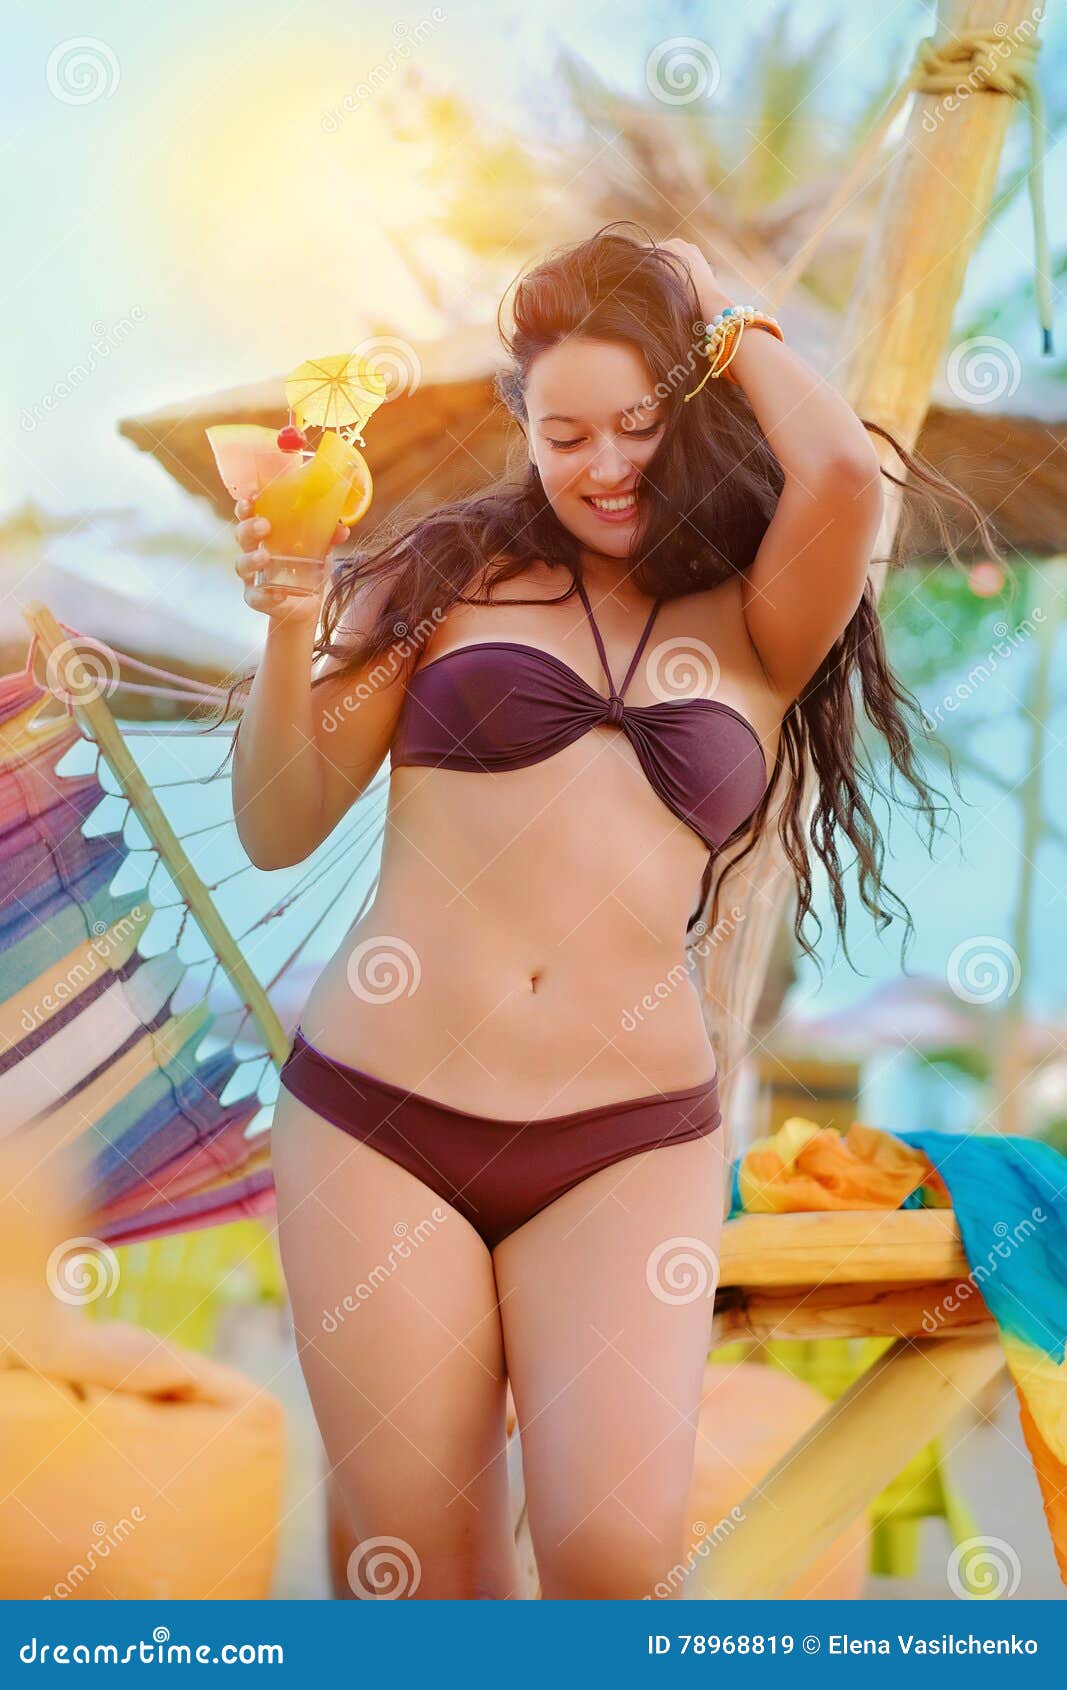 young girls plus size beach